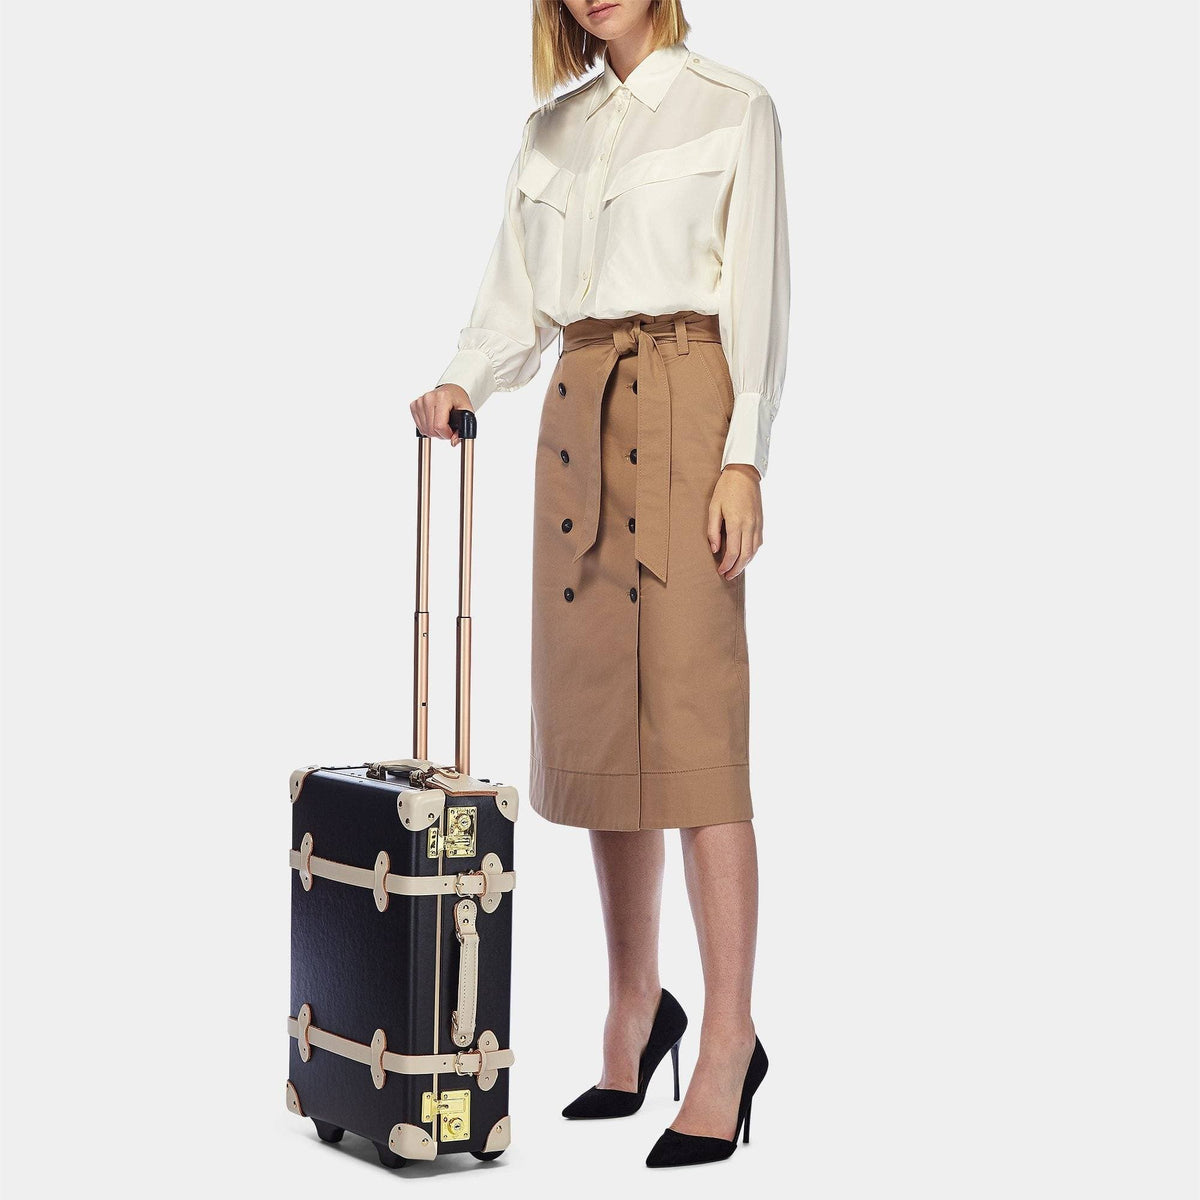 The Starlet - Carryon Carryon Steamline Luggage 